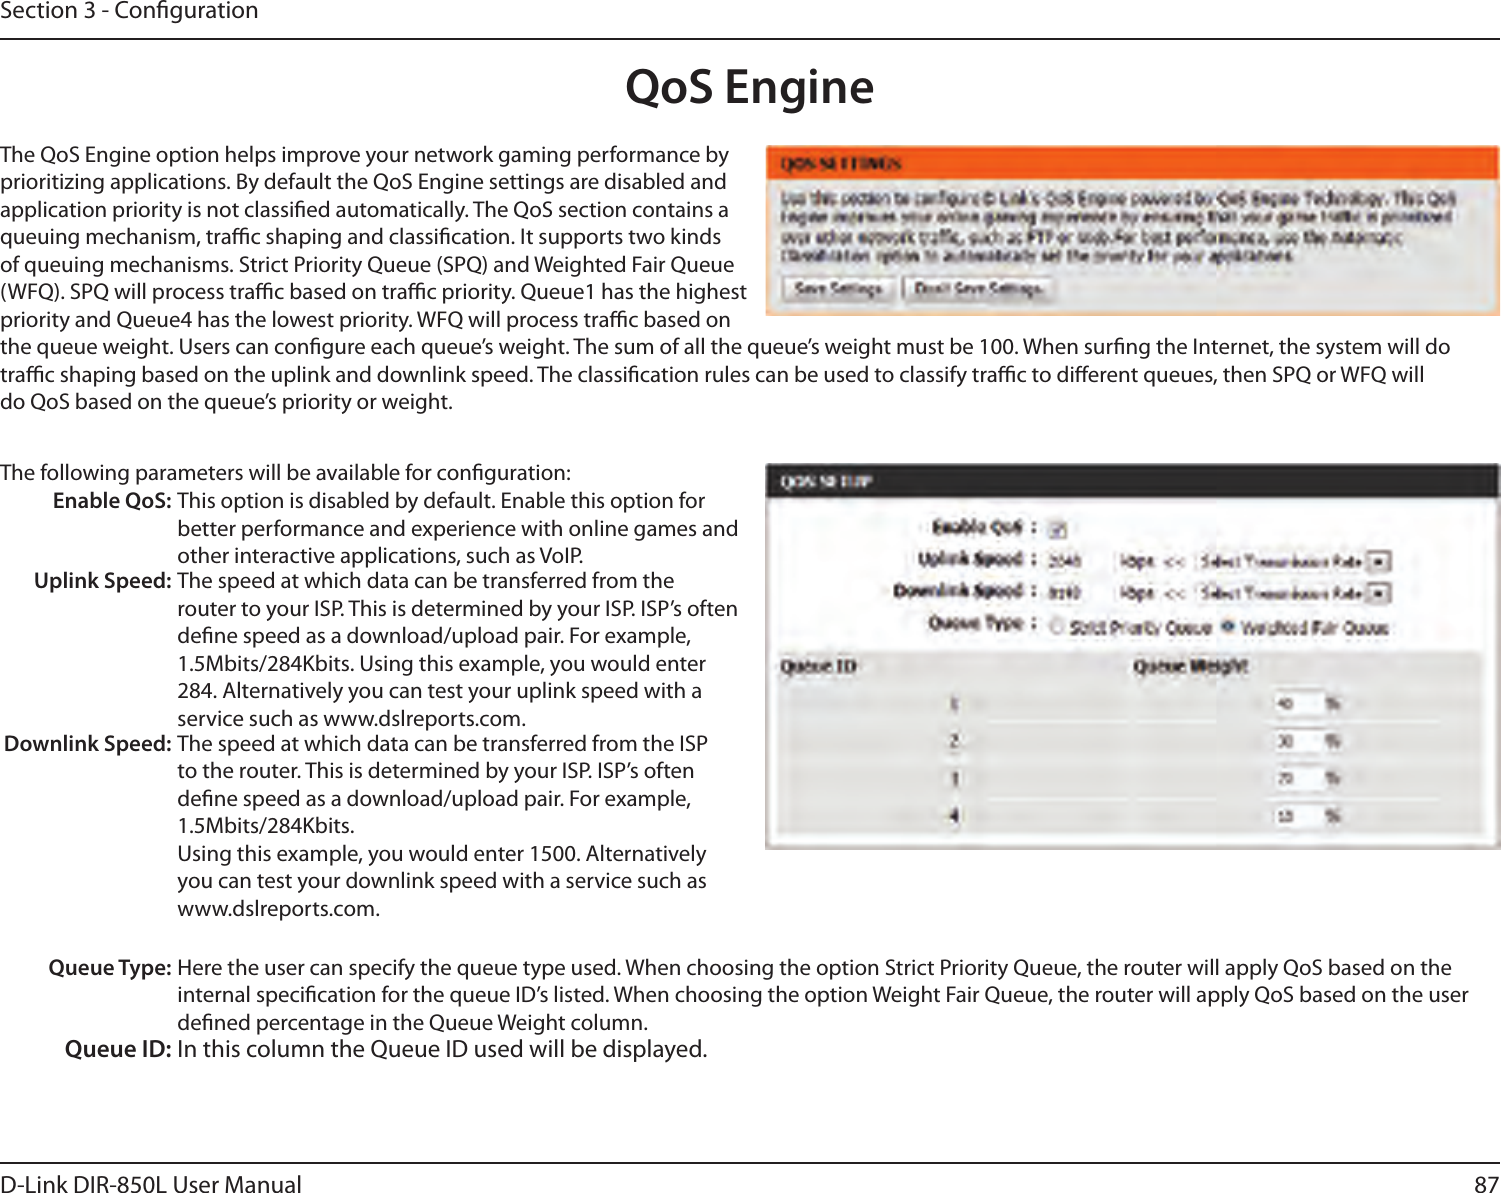 87D-Link DIR-850L User ManualSection 3 - CongurationQoS EngineThe QoS Engine option helps improve your network gaming performance by prioritizing applications. By default the QoS Engine settings are disabled and application priority is not classied automatically. The QoS section contains a queuing mechanism, trac shaping and classication. It supports two kinds of queuing mechanisms. Strict Priority Queue (SPQ) and Weighted Fair Queue (WFQ). SPQ will process trac based on trac priority. Queue1 has the highest priority and Queue4 has the lowest priority. WFQ will process trac based on the queue weight. Users can congure each queue’s weight. The sum of all the queue’s weight must be 100. When surng the Internet, the system will do trac shaping based on the uplink and downlink speed. The classication rules can be used to classify trac to dierent queues, then SPQ or WFQ will do QoS based on the queue’s priority or weight.The following parameters will be available for conguration:Enable QoS: This option is disabled by default. Enable this option for better performance and experience with online games and other interactive applications, such as VoIP.Uplink Speed: The speed at which data can be transferred from the router to your ISP. This is determined by your ISP. ISP’s often dene speed as a download/upload pair. For example, 1.5Mbits/284Kbits. Using this example, you would enter 284. Alternatively you can test your uplink speed with a service such as www.dslreports.com.Downlink Speed: The speed at which data can be transferred from the ISP to the router. This is determined by your ISP. ISP’s often dene speed as a download/upload pair. For example, 1.5Mbits/284Kbits. Using this example, you would enter 1500. Alternatively you can test your downlink speed with a service such as www.dslreports.com.Queue Type: Here the user can specify the queue type used. When choosing the option Strict Priority Queue, the router will apply QoS based on the internal specication for the queue ID’s listed. When choosing the option Weight Fair Queue, the router will apply QoS based on the user dened percentage in the Queue Weight column.Queue ID: In this column the Queue ID used will be displayed.